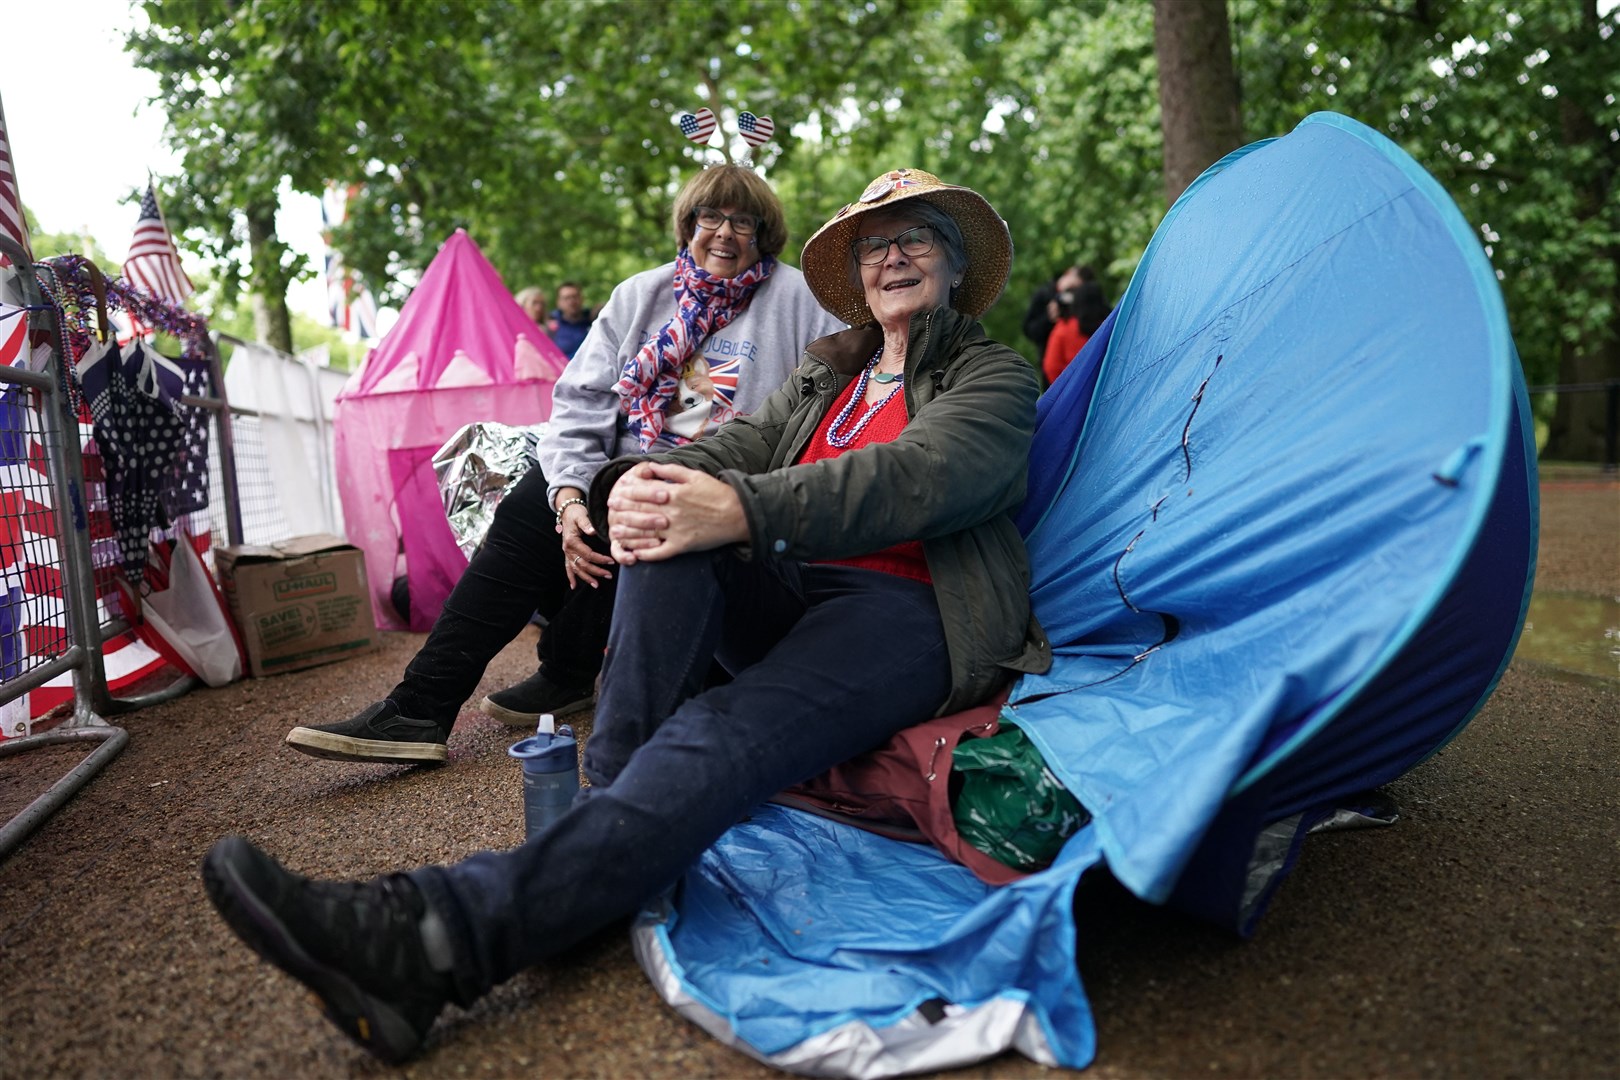 Royal fans camping out on The Mall (Aaron Chown/PA)